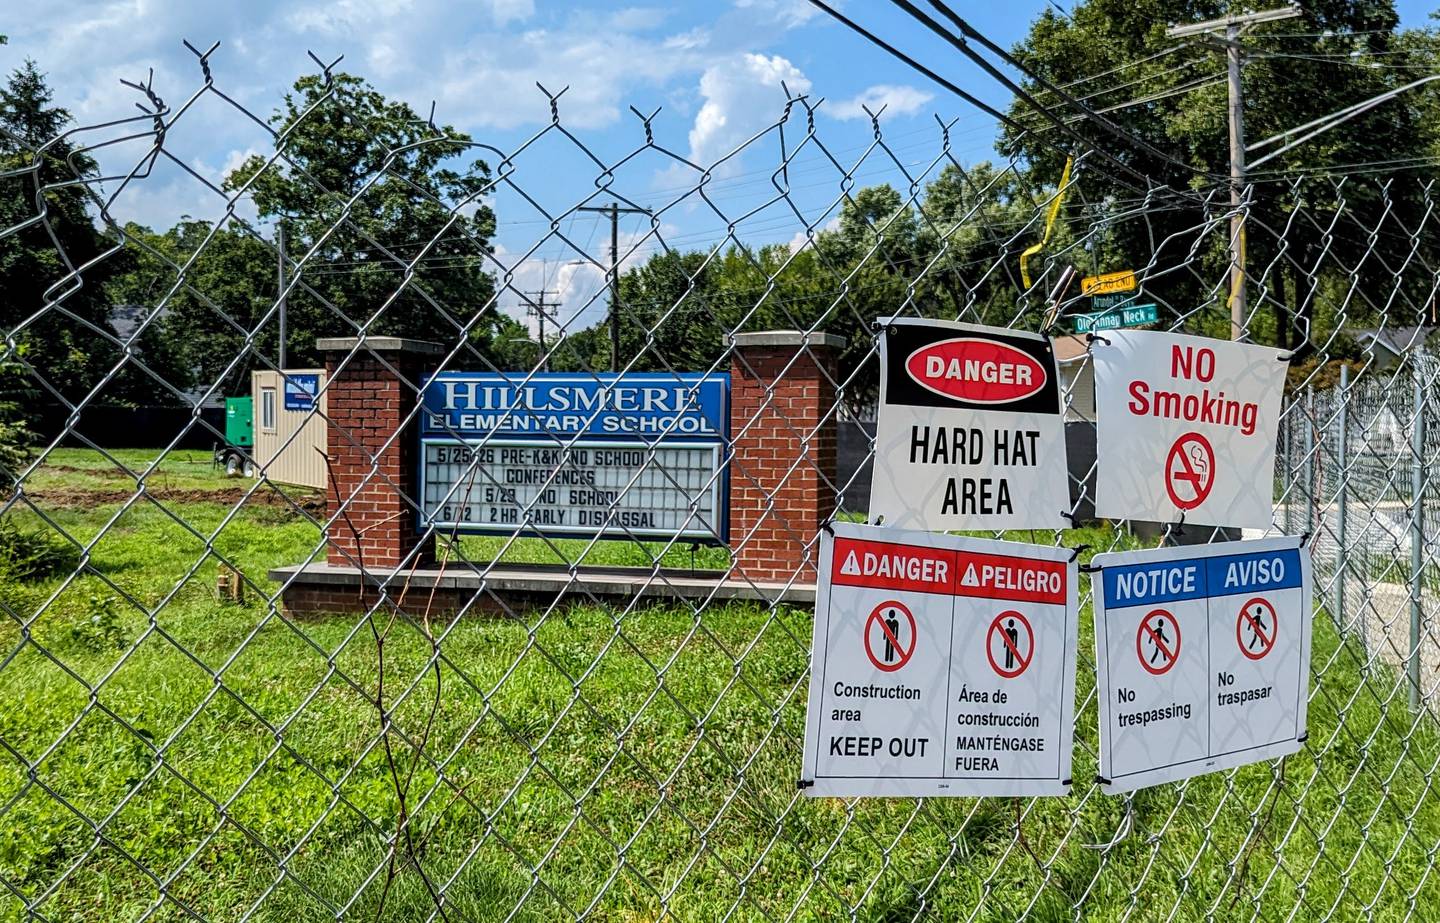 All that's left of old Hillsmere Elementary School in Annapolis is the sign, as work continues on shifting students and staff to a new building later this month.